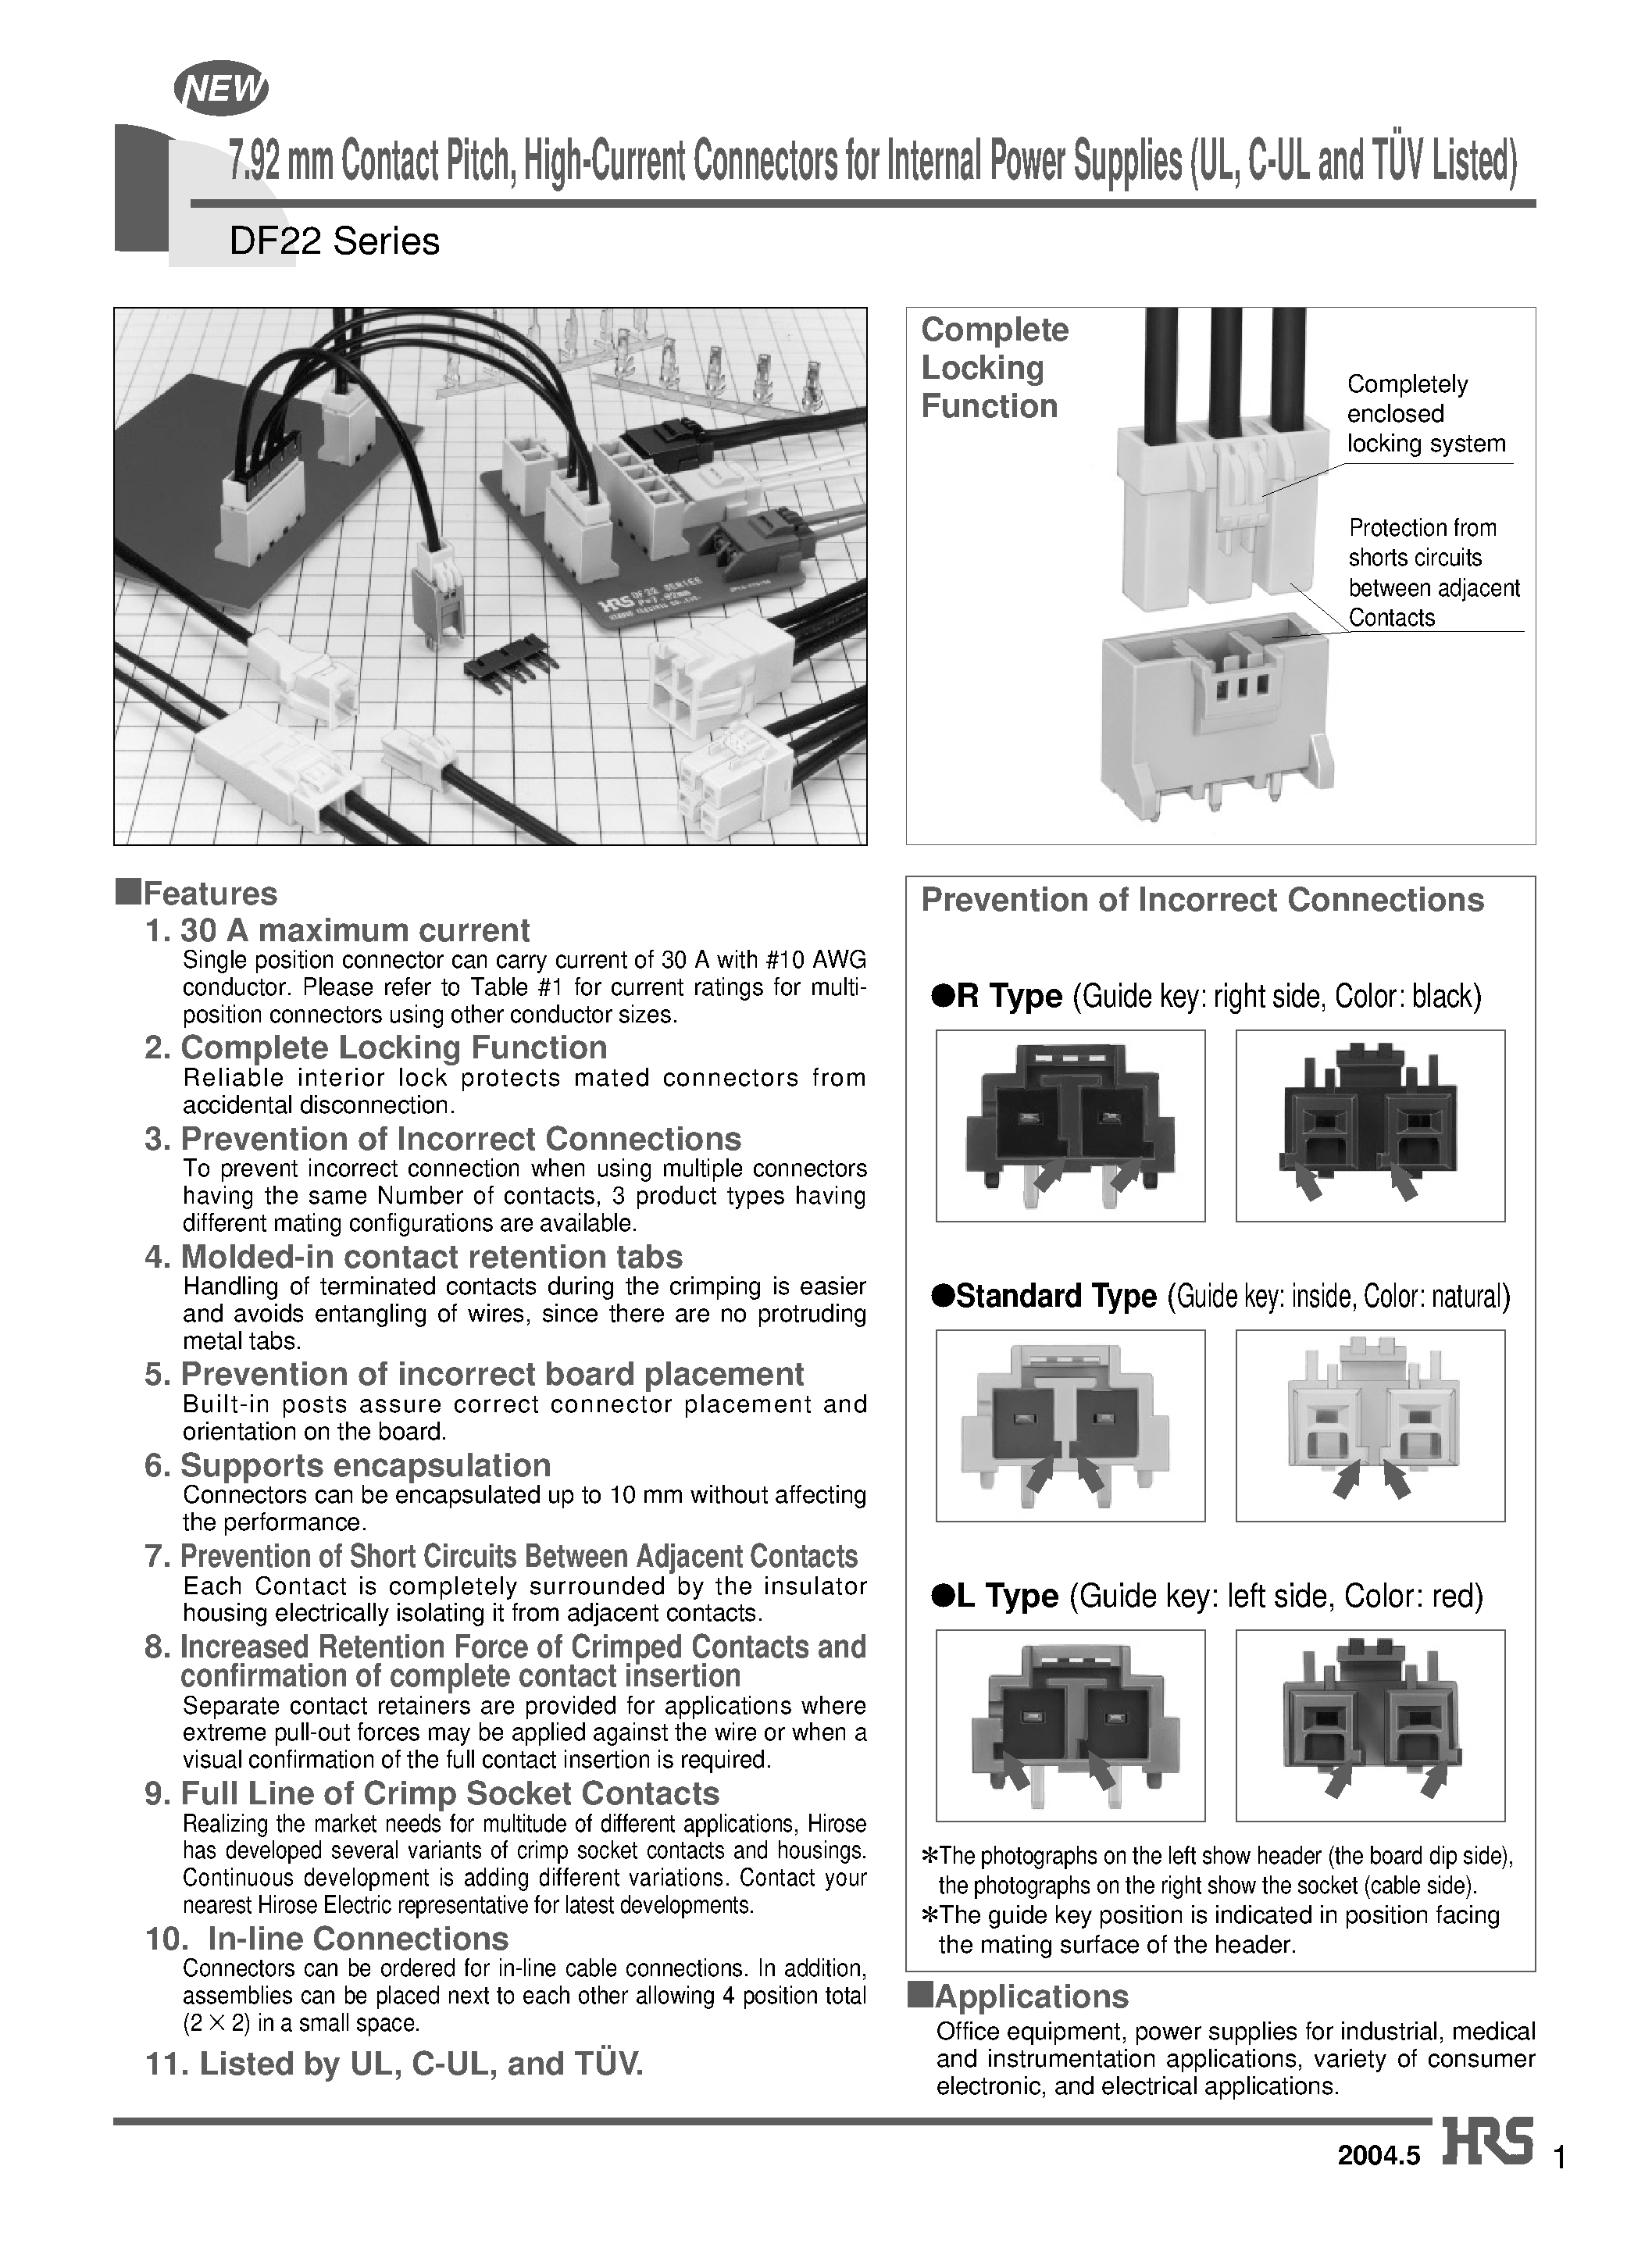 Datasheet DF22A-5P-7.92DSA - 7.92 mm Contact Pitch/ High-Current Connectors for Internal Power Supplies (UL/ C-UL and TUV Listed) page 1